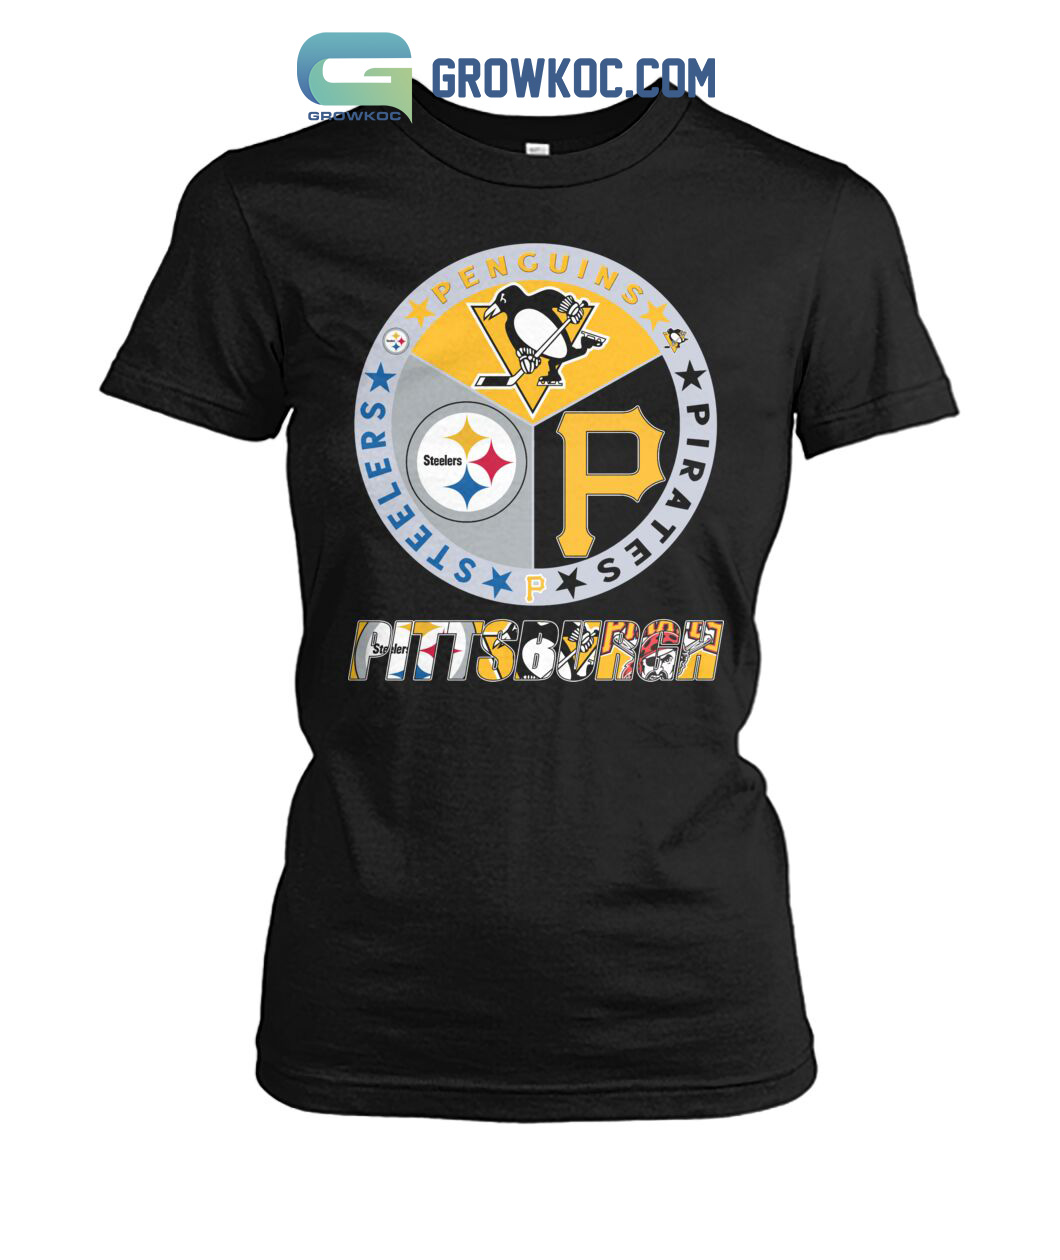 Pittsburgh: Penguins, Steelers, Pirates.